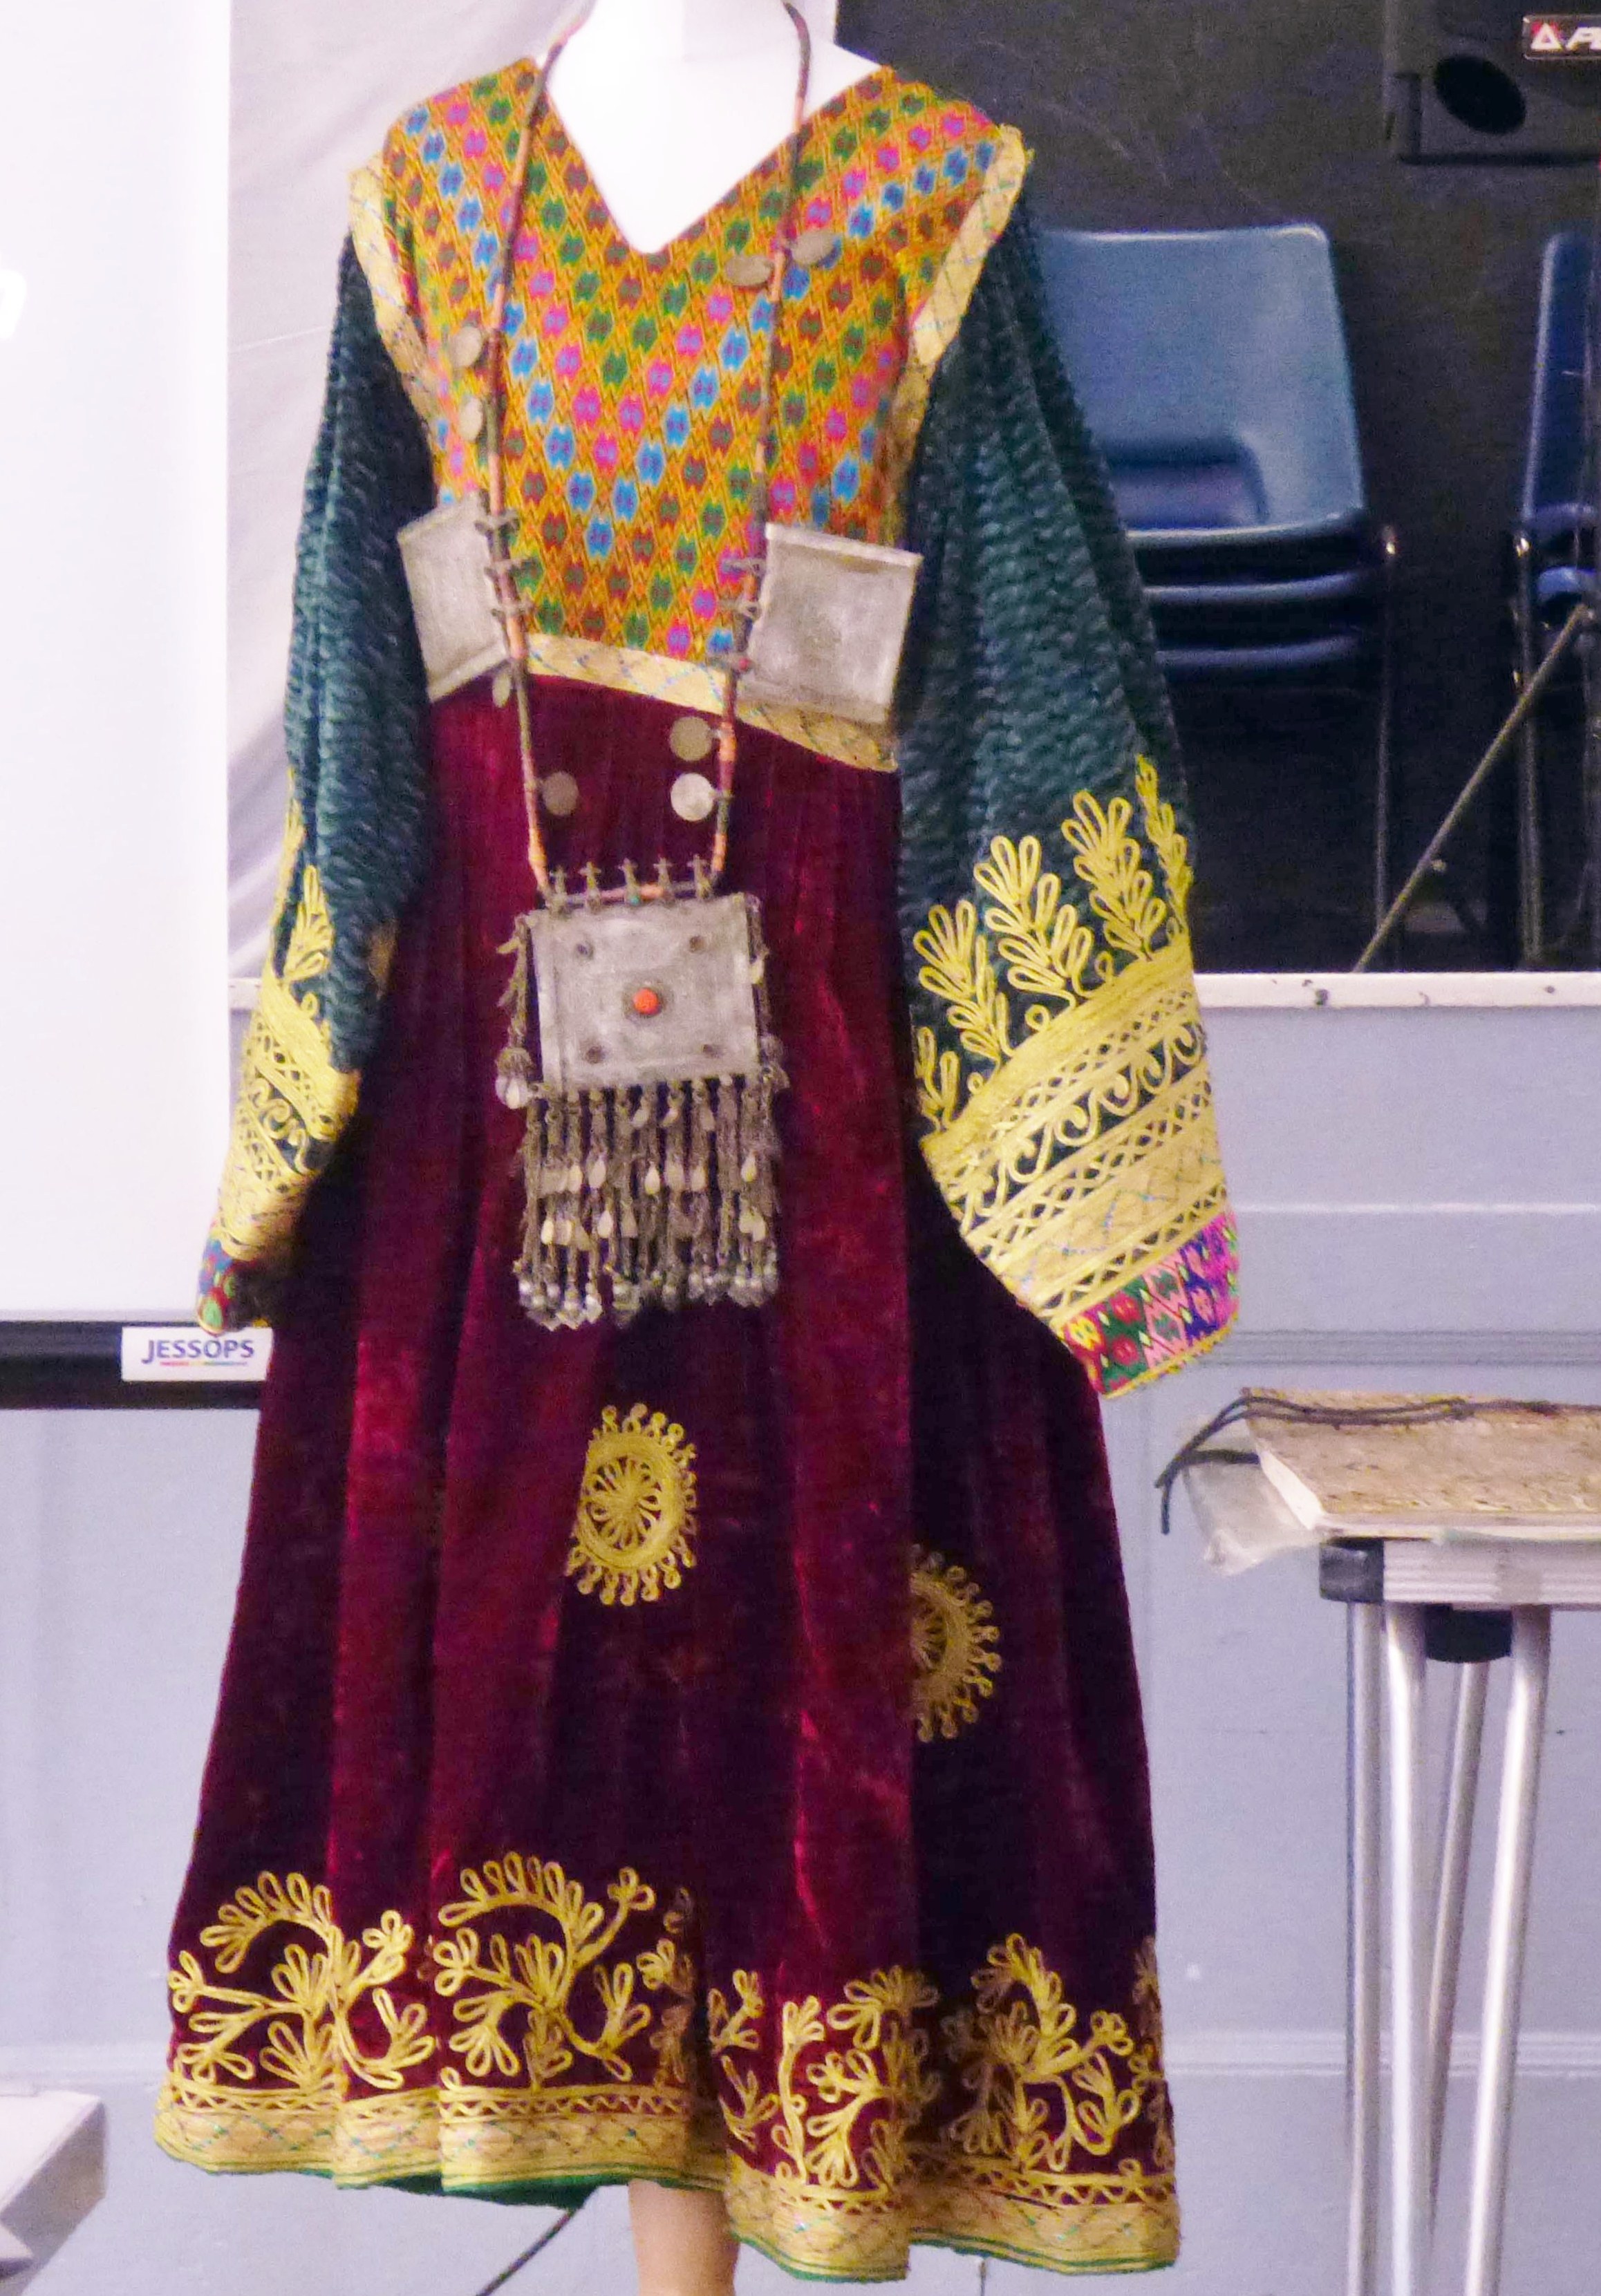 textiles in the collection of Nawal Gebreel, "Textiles of Afghanistan" Talk, Oct 2021